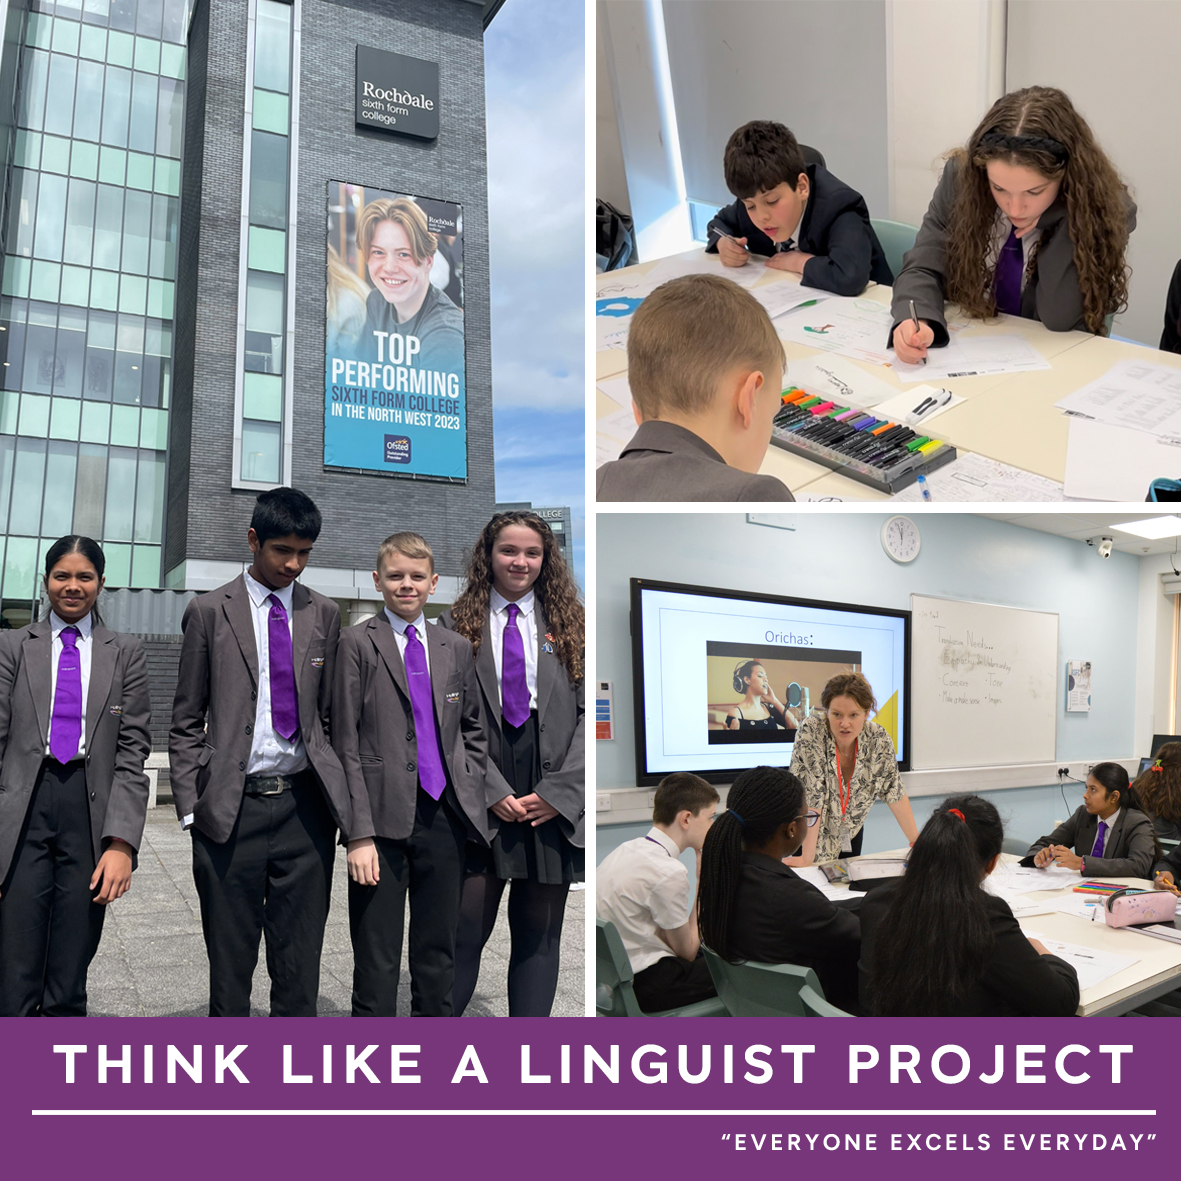 Yesterday, a group of our top performing MFL students attended @RochdaleSFC for the 3rd session of the Think Like a Linguist project, delivered by @QueensCam, @UniofOxford, @StephenSpender, & @Atom_Valley collaboration. @WCSQM @ottleyoconnor #worldclass #everyoneexcelseveryday